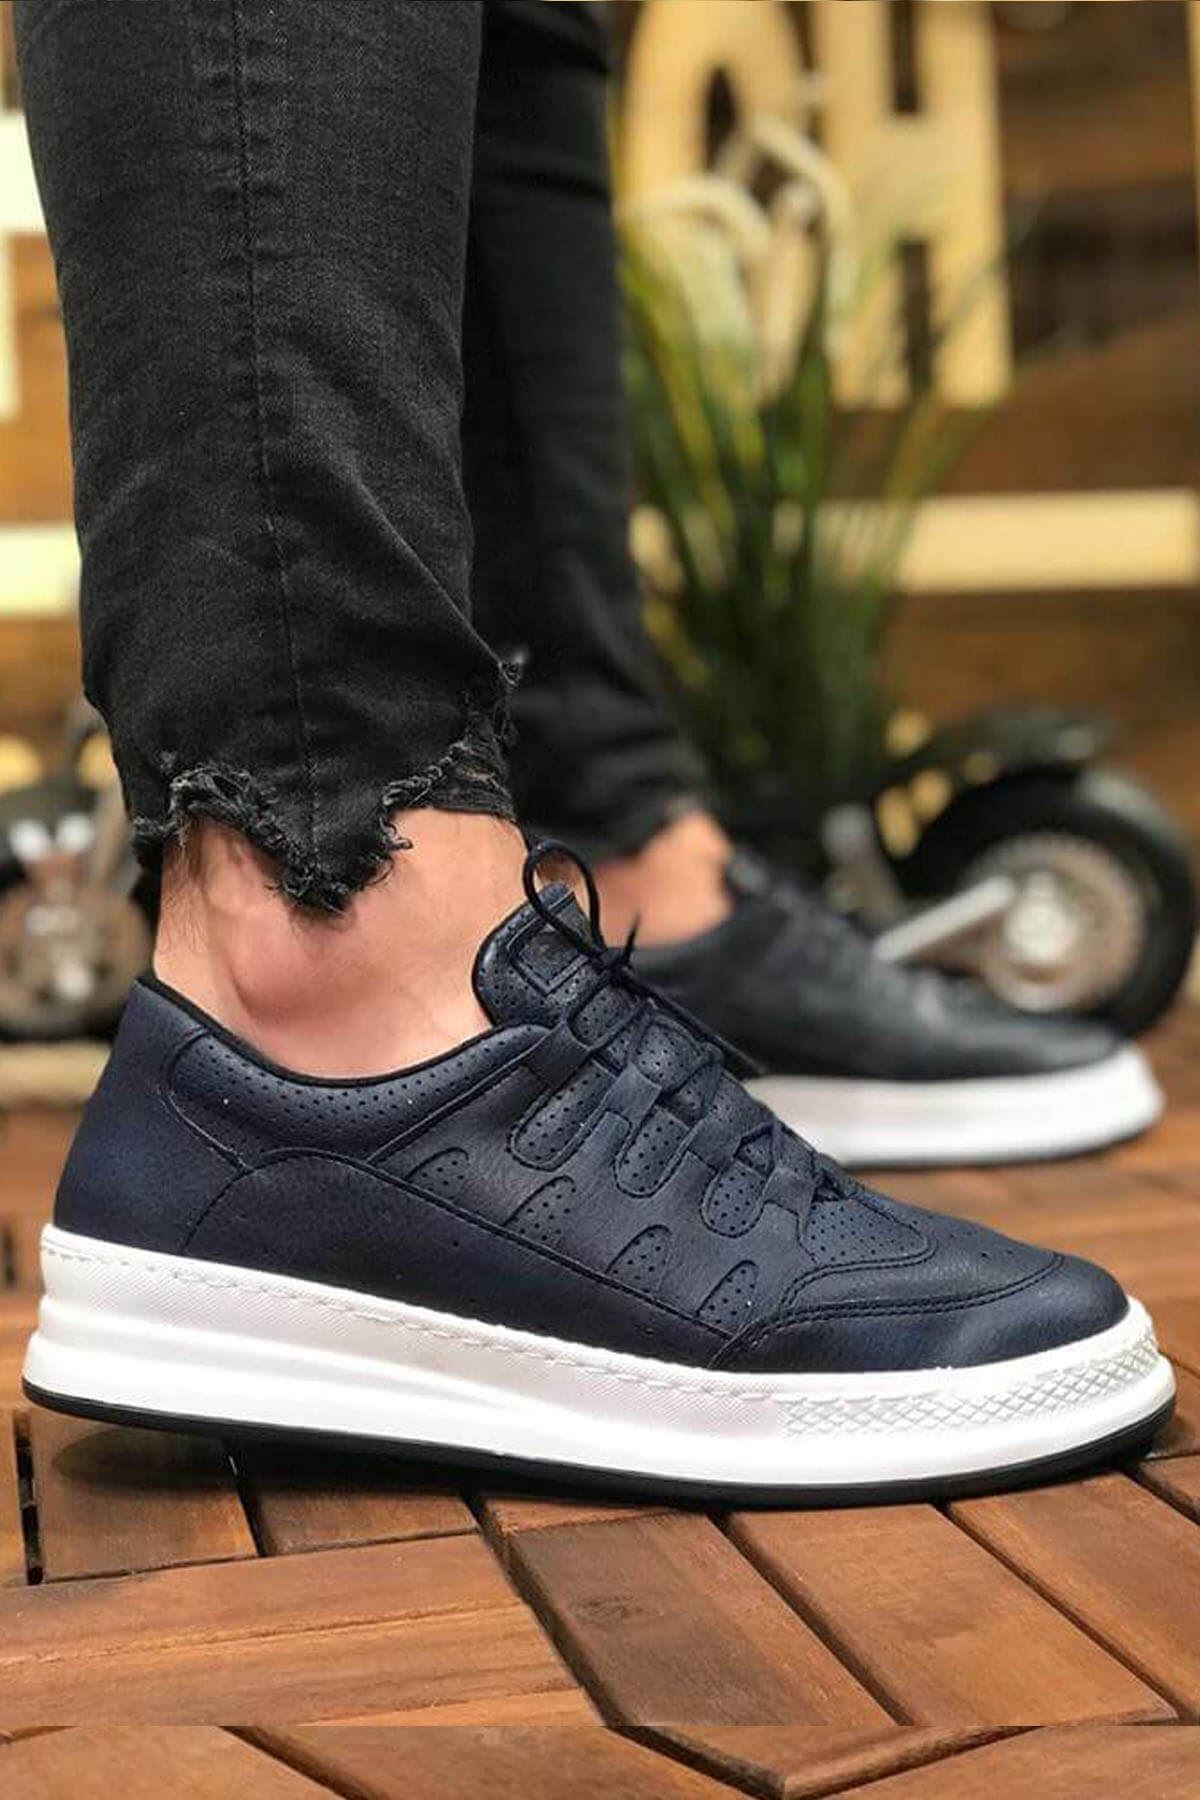 CH040 Men's Unisex Orthopedics Navy Blue-White Sole Casual Sneaker Sports Shoes - STREETMODE™